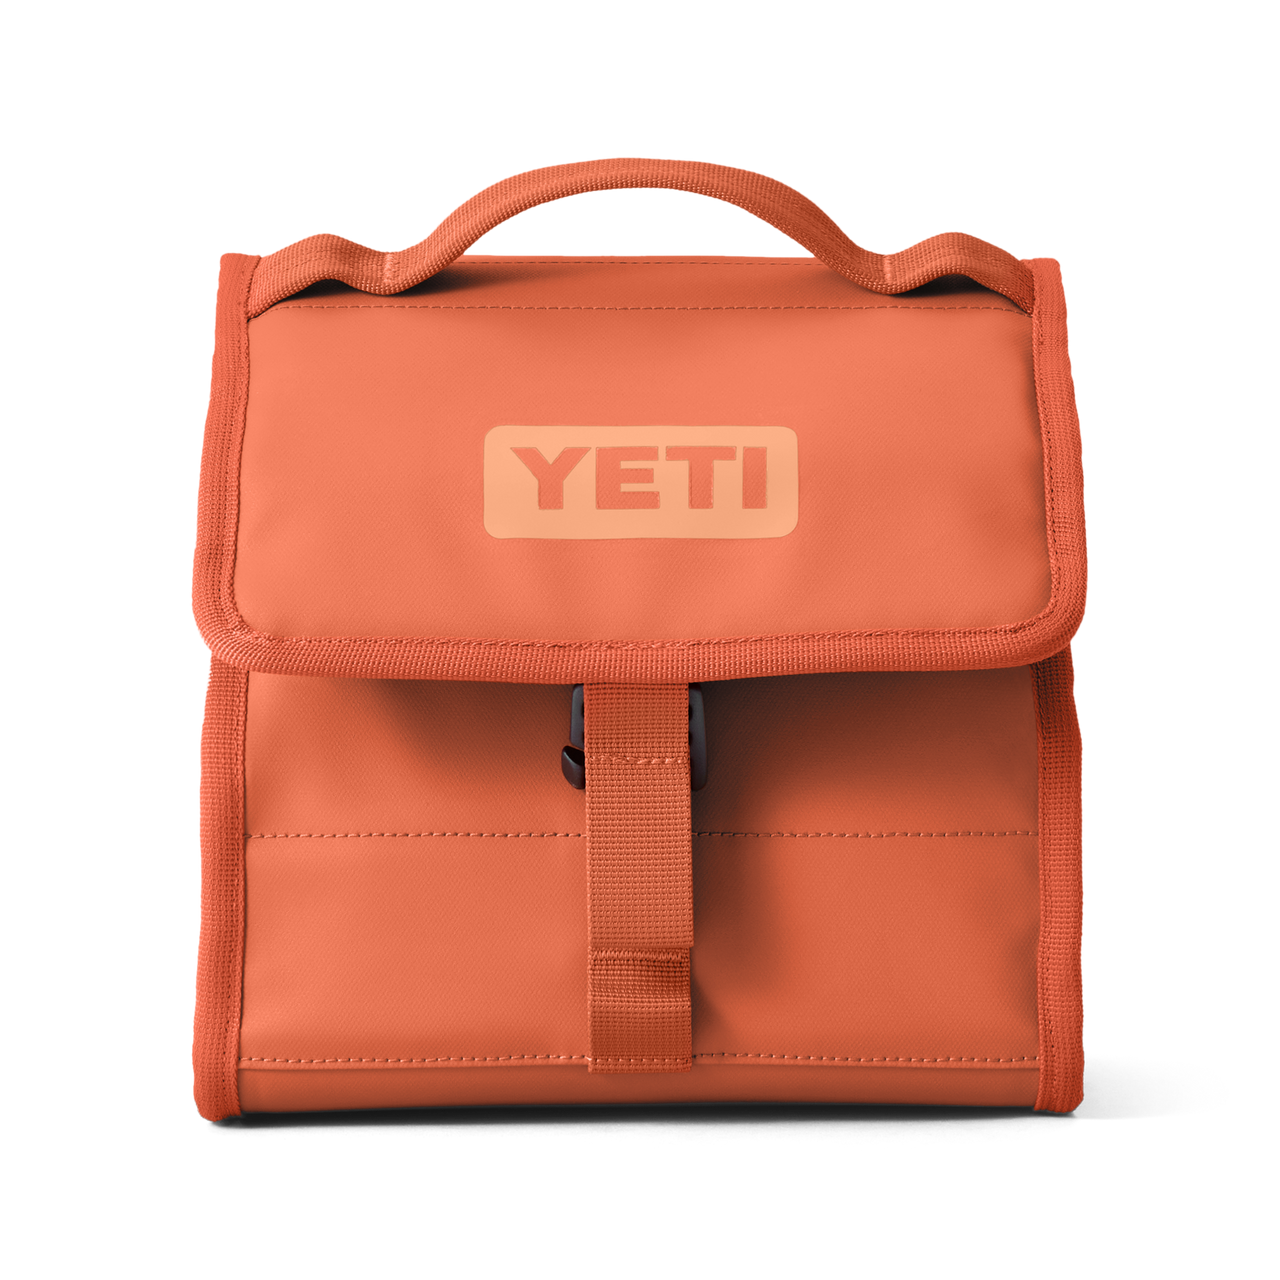 Yeti Daytrip Lunch bag, Coldcell Flex Insulation, Fold and Go